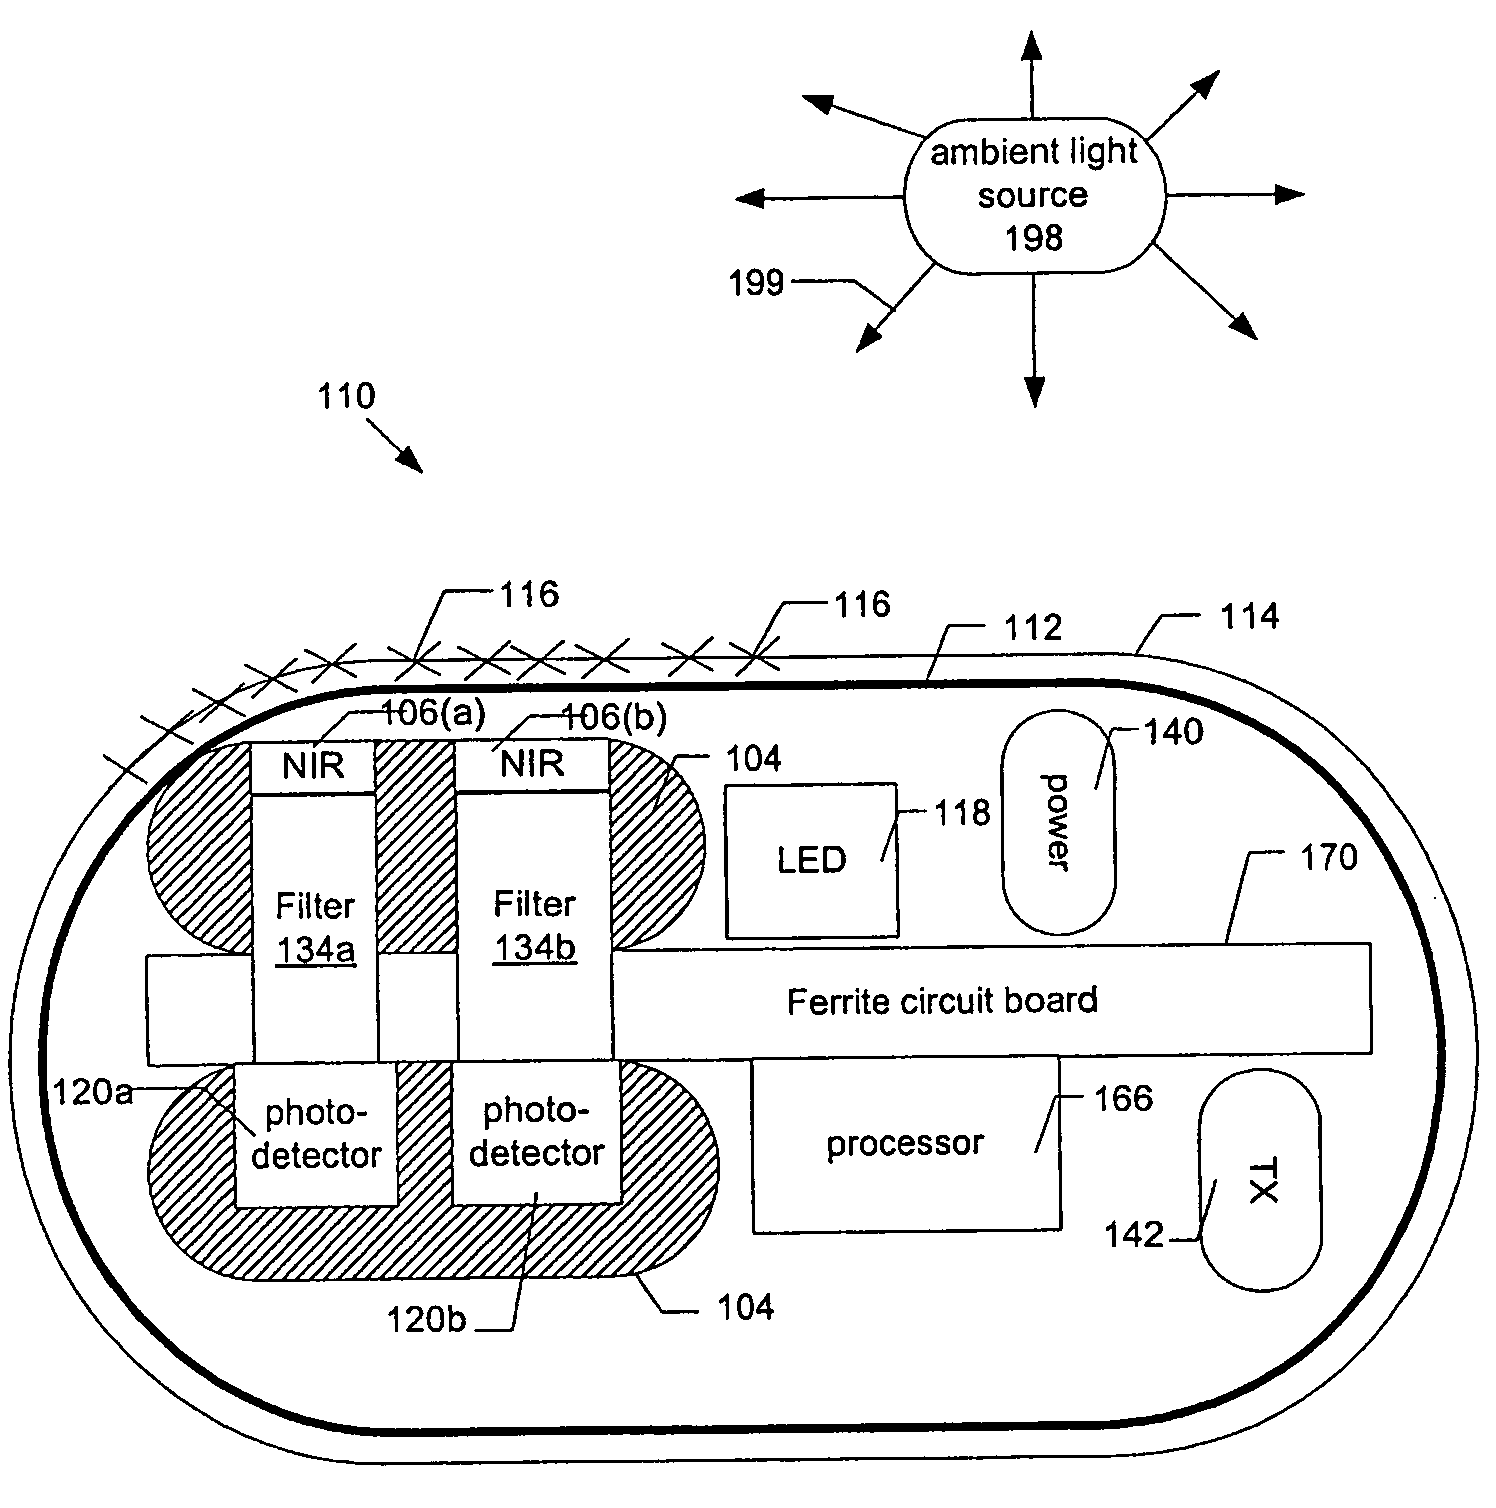 System and method for attenuating the effect of ambient light on an optical sensor